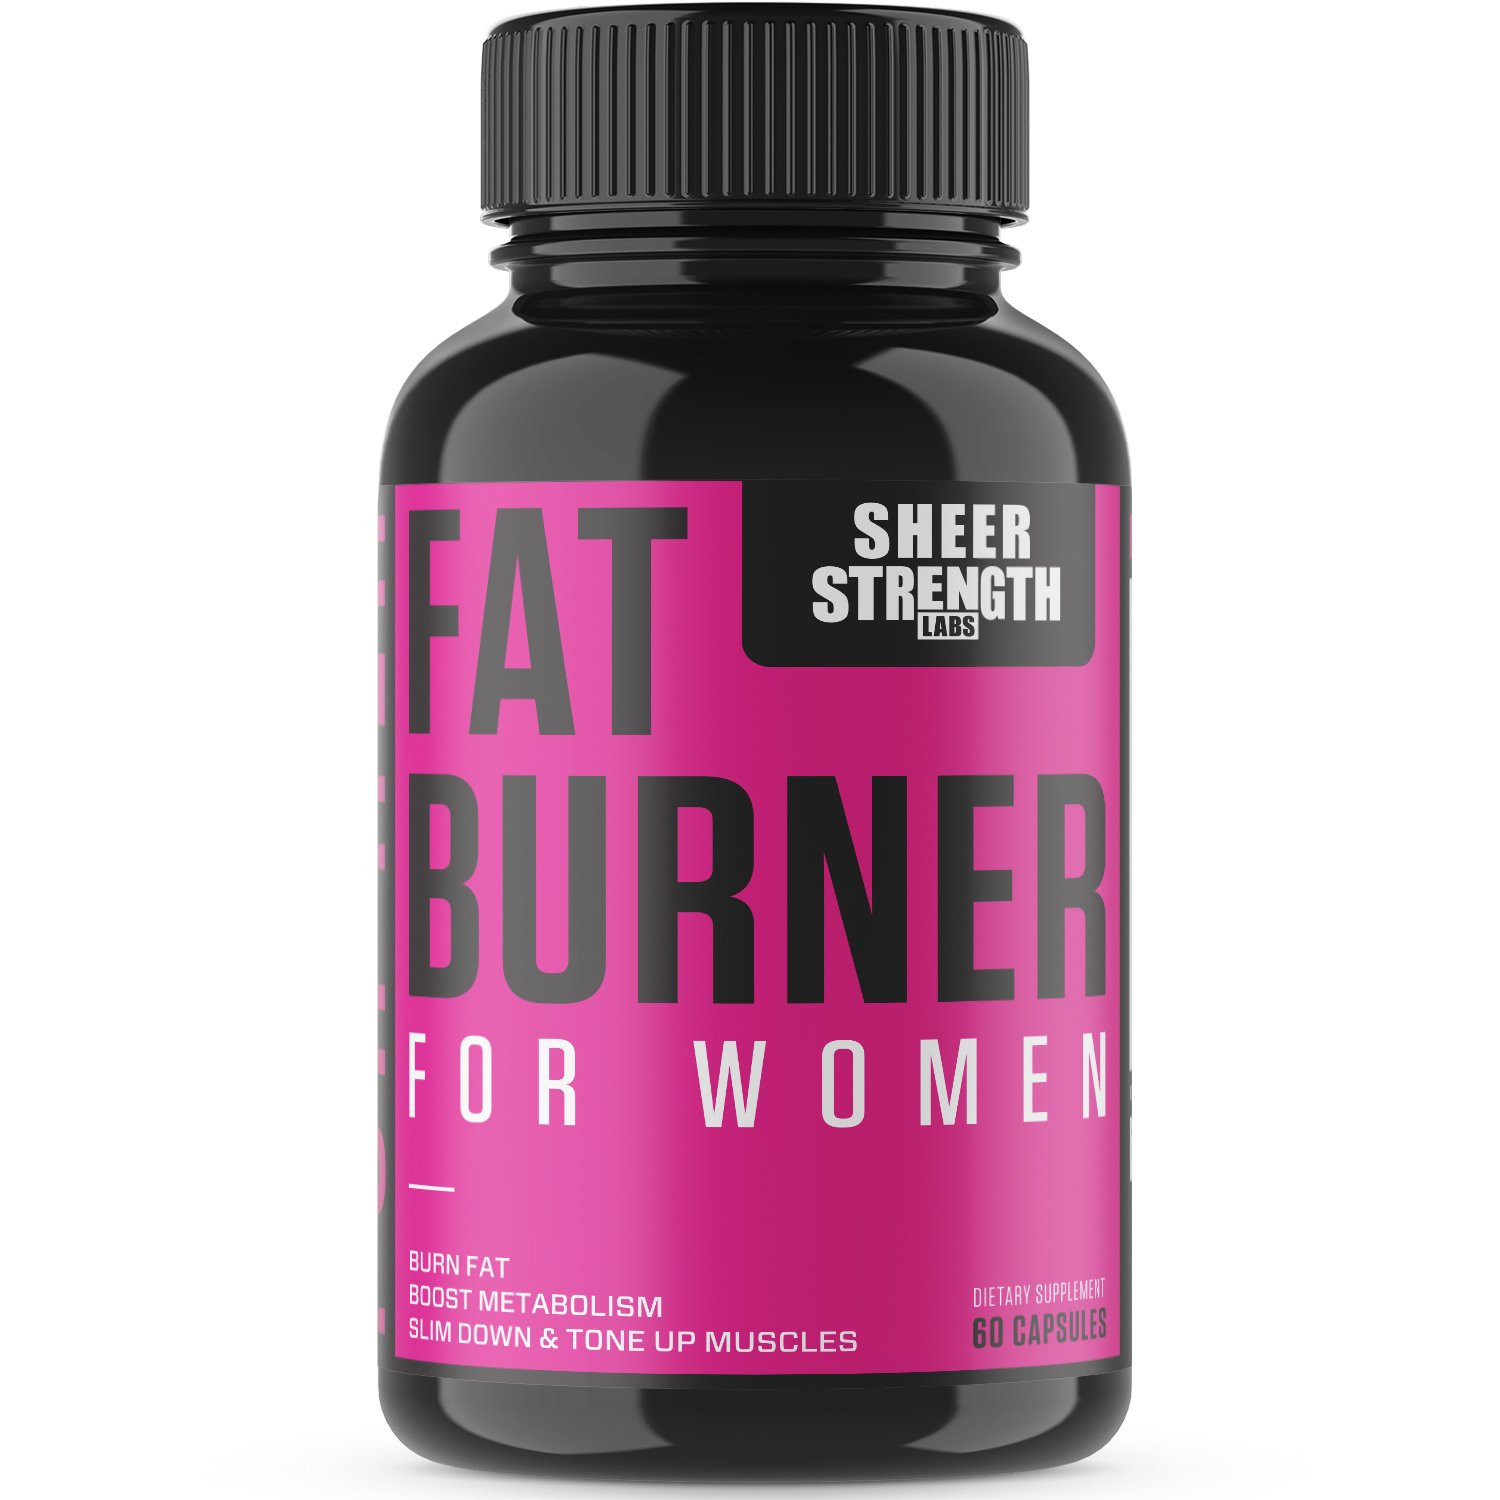 Weight Loss Supplements That Work Fat Burning
 Best Natural Fat Burners Weight Loss Supplements List